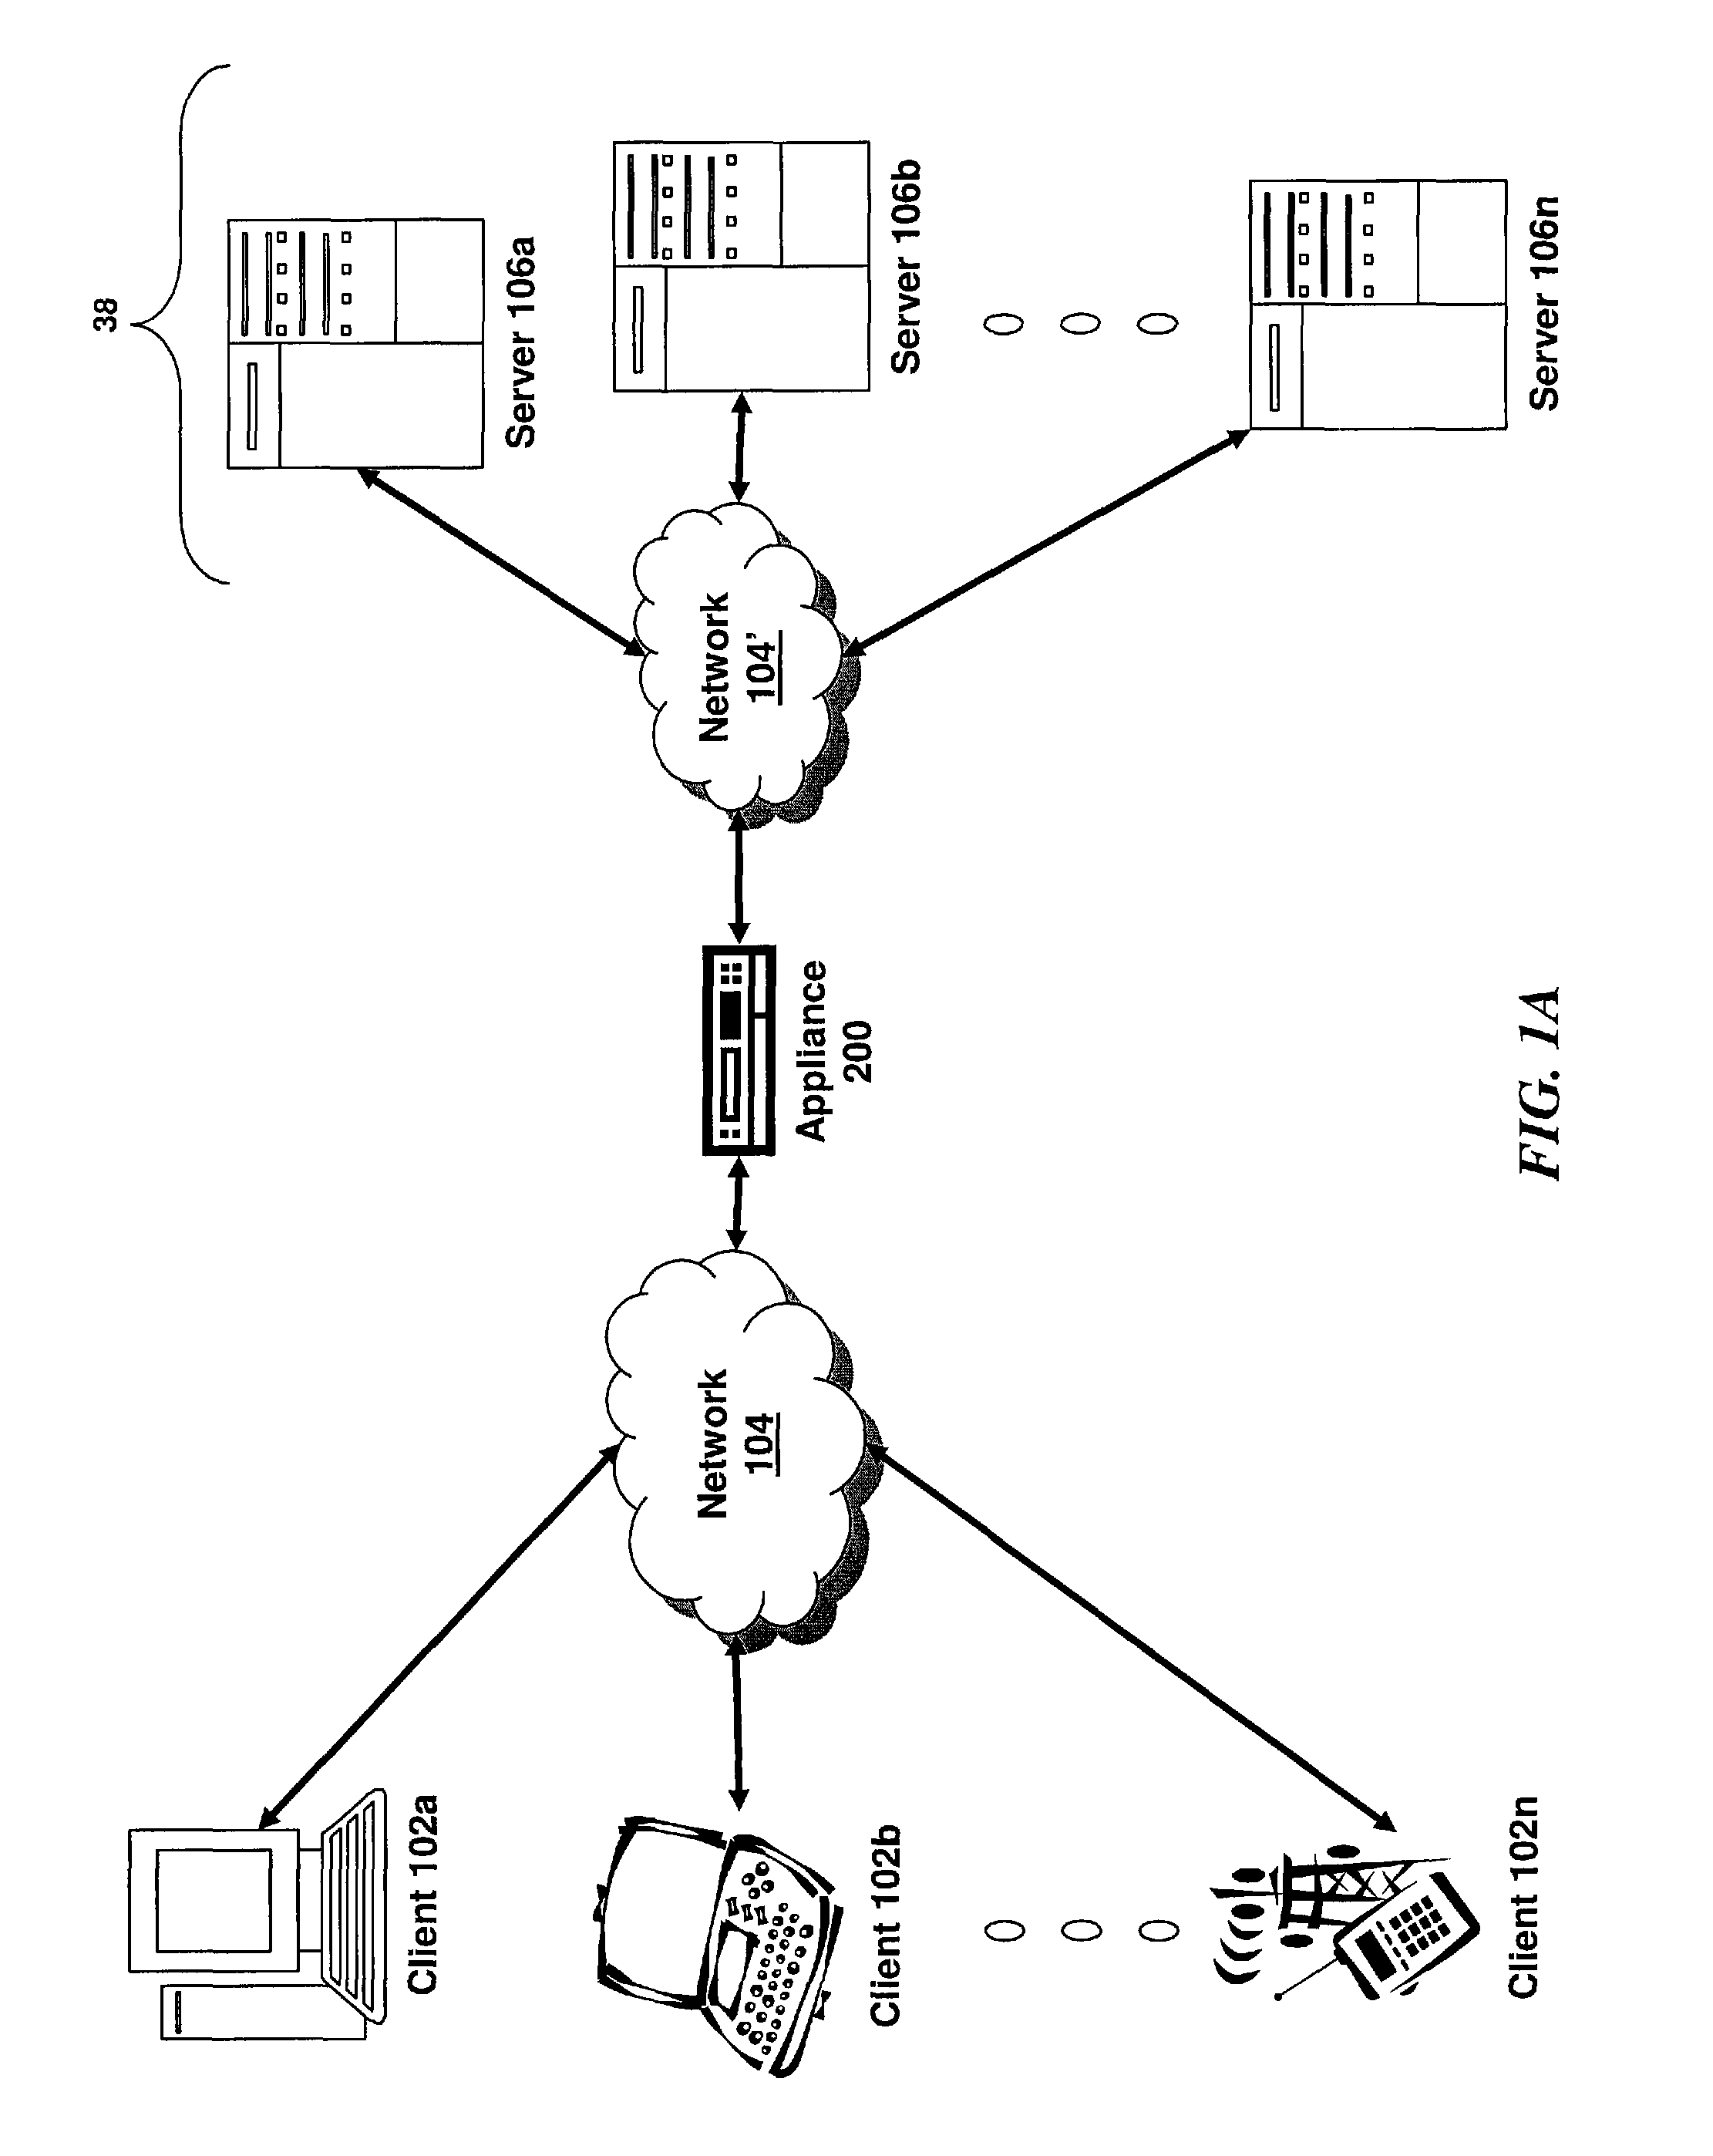 Systems and methods for identifying a processor from a plurality of processors to provide symmetrical request and response processing